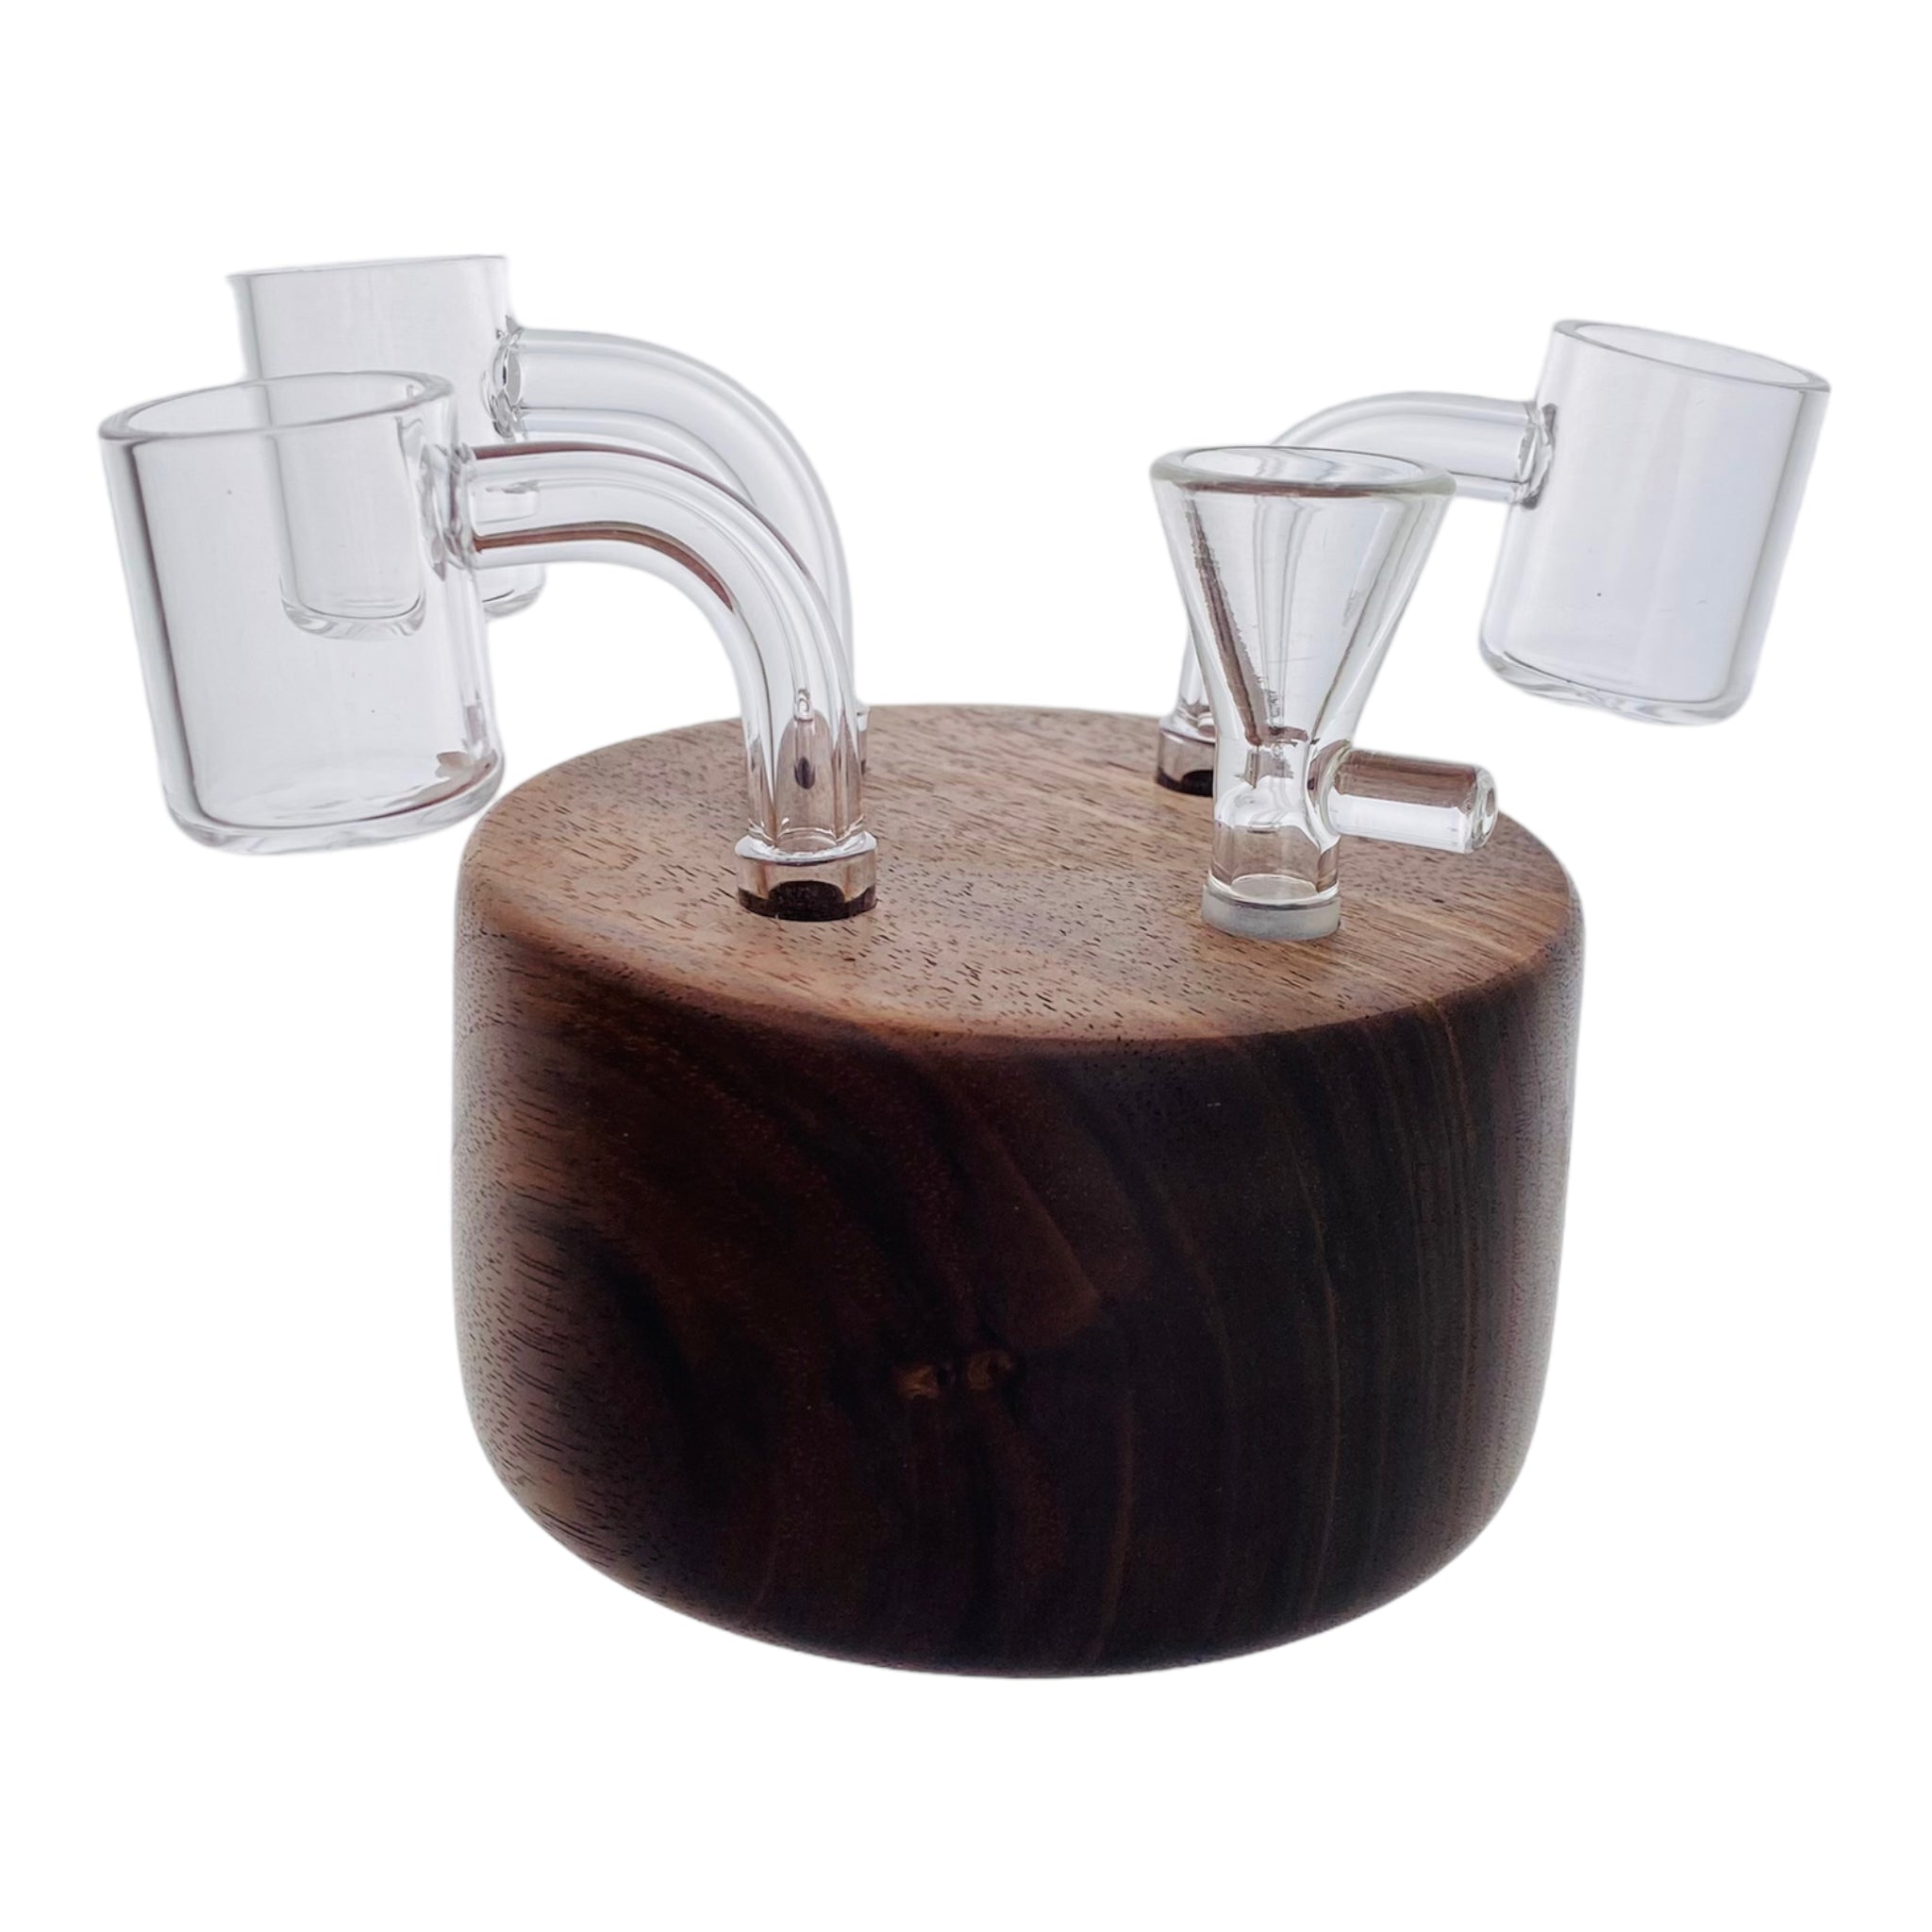 Round 4 Hole Wood Display Stand Holder For 10mm Bong Bowl Pieces Or Quartz Bangers - Black Walnut